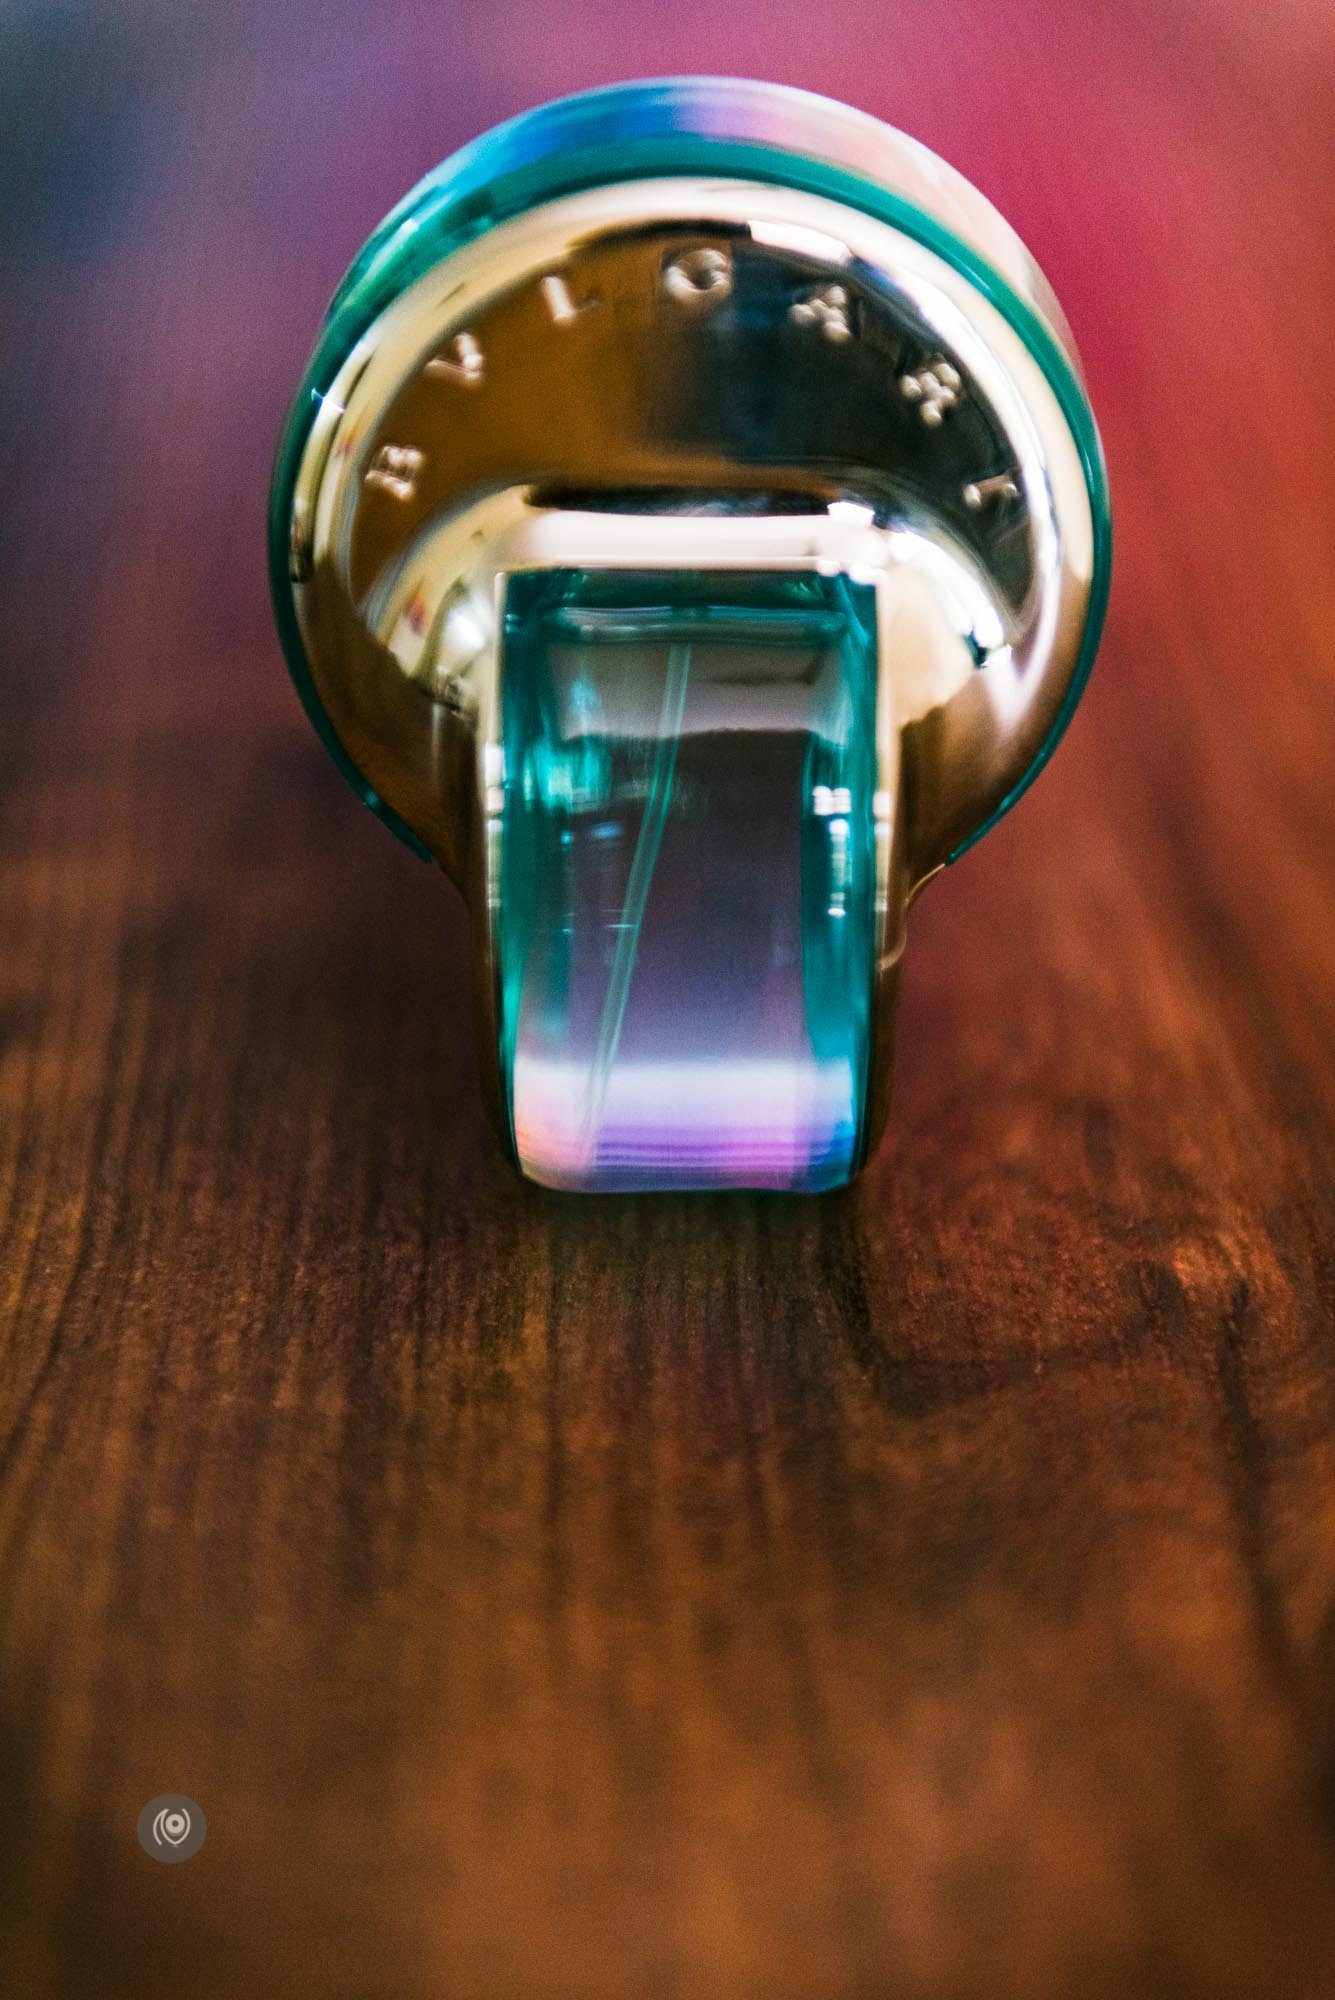 Omnia Paraiba by Bvlgari, Omnia, Paraiba, Bvlgari, Bulgari, Turquoise, Tourmaline, Fragrance Of The Month, #FragranceOfTheMonth, Naina.co, Luxury Photographer, Lifestyle Photographer, Luxury Blogger, Lifestyle Blogger, Experience Collector, #EyesForLuxury